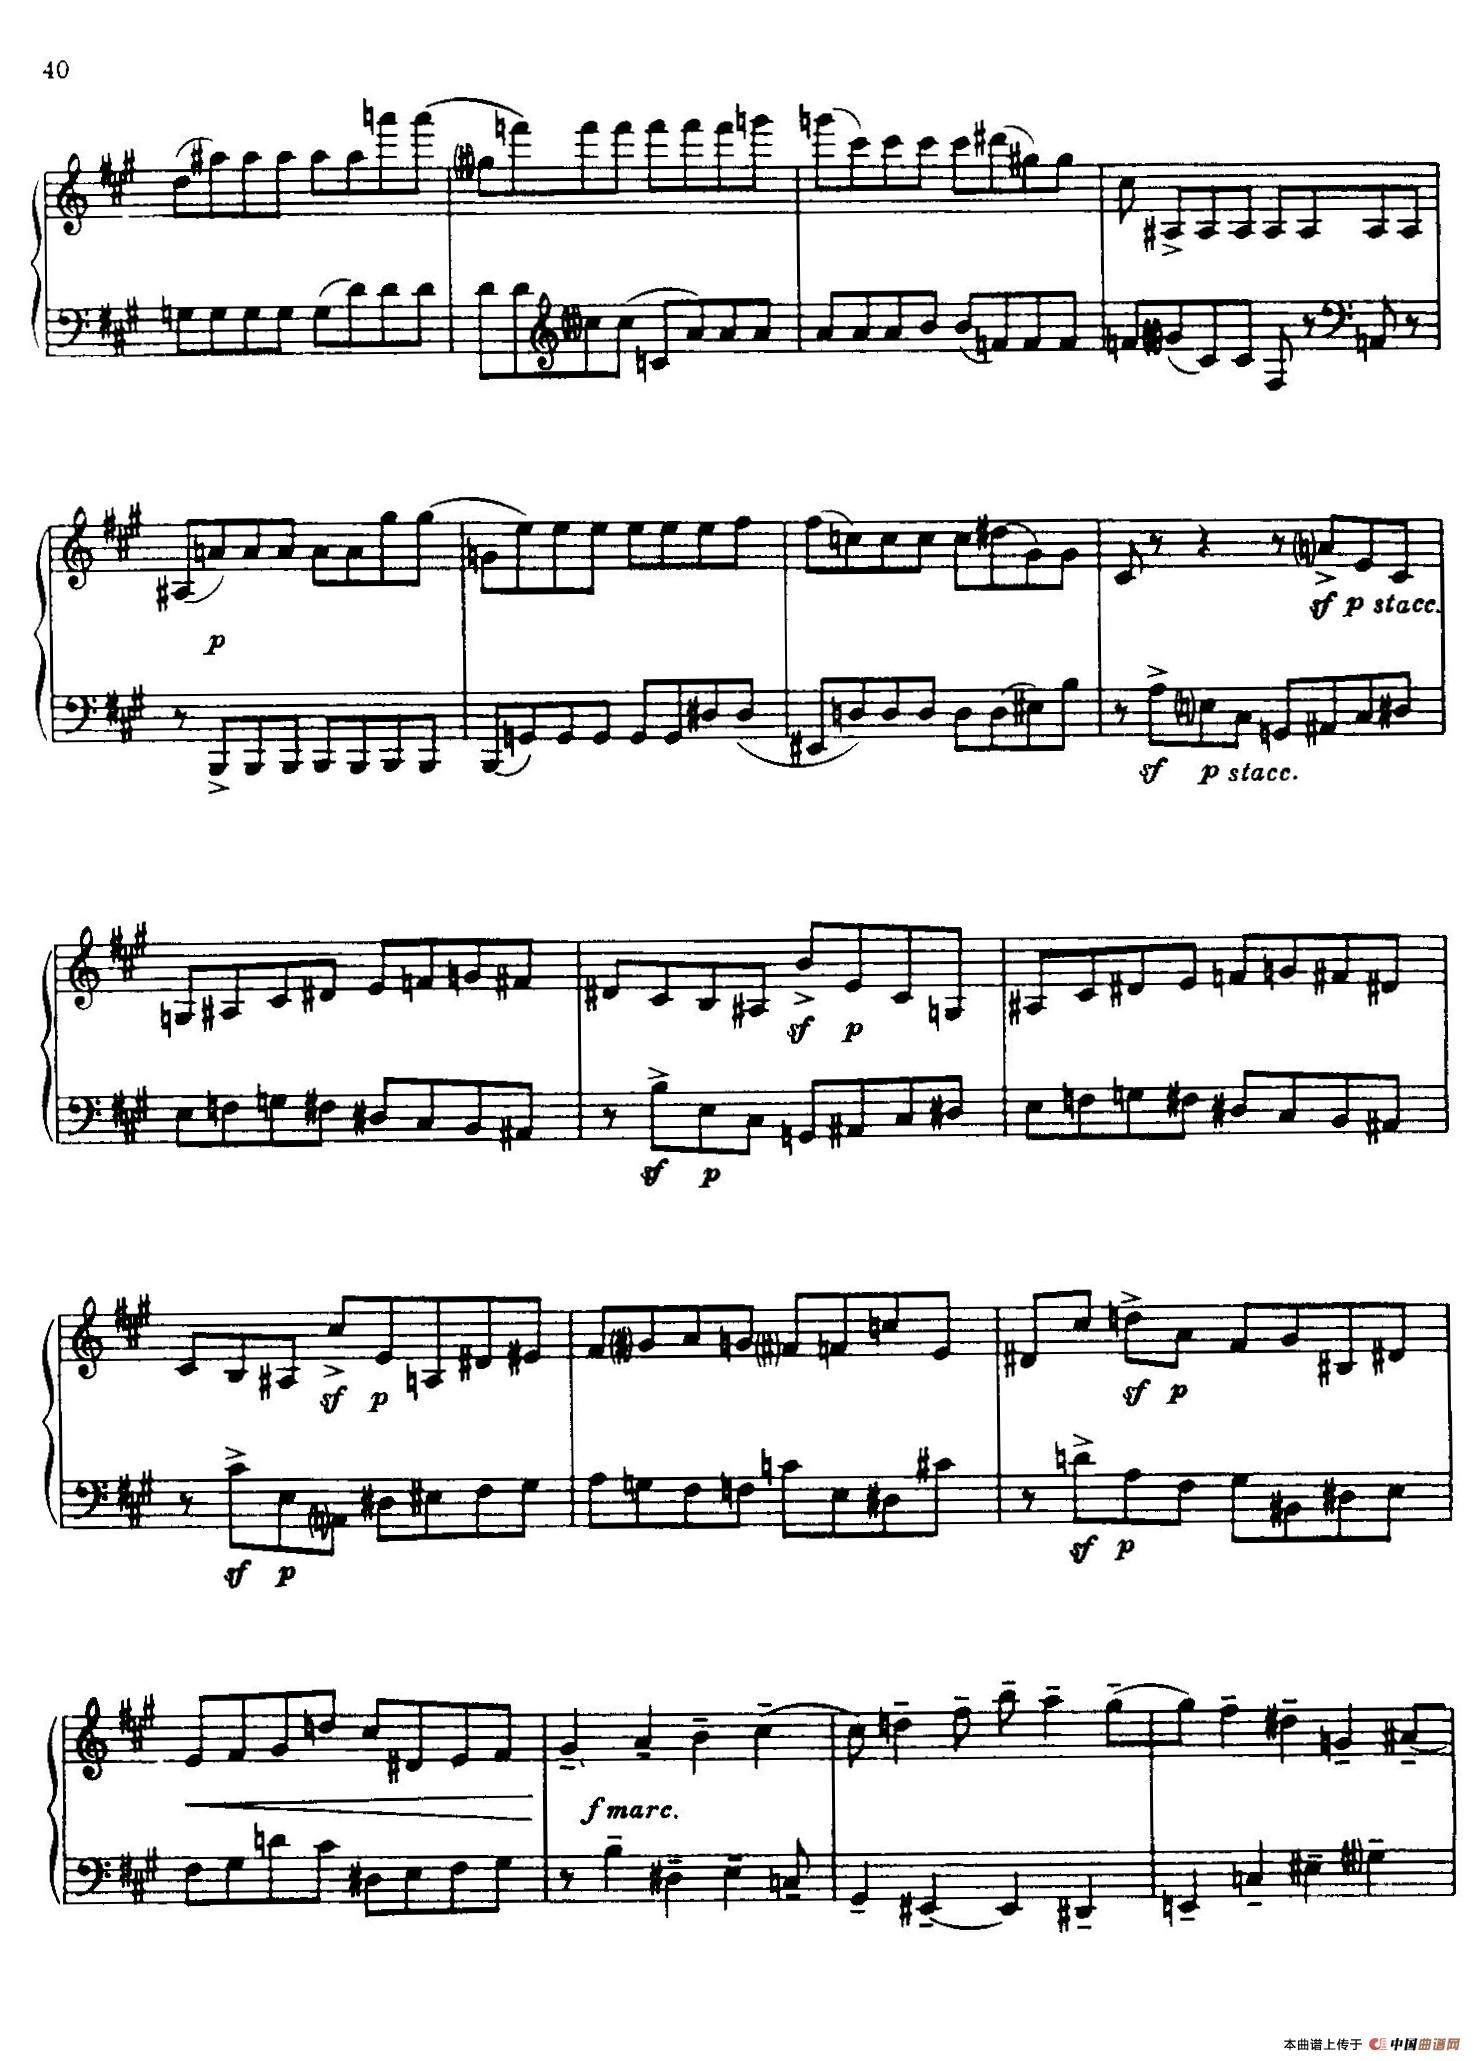 24 Preludes and Fugues Part.1 Op.45（24首前奏曲与赋格·